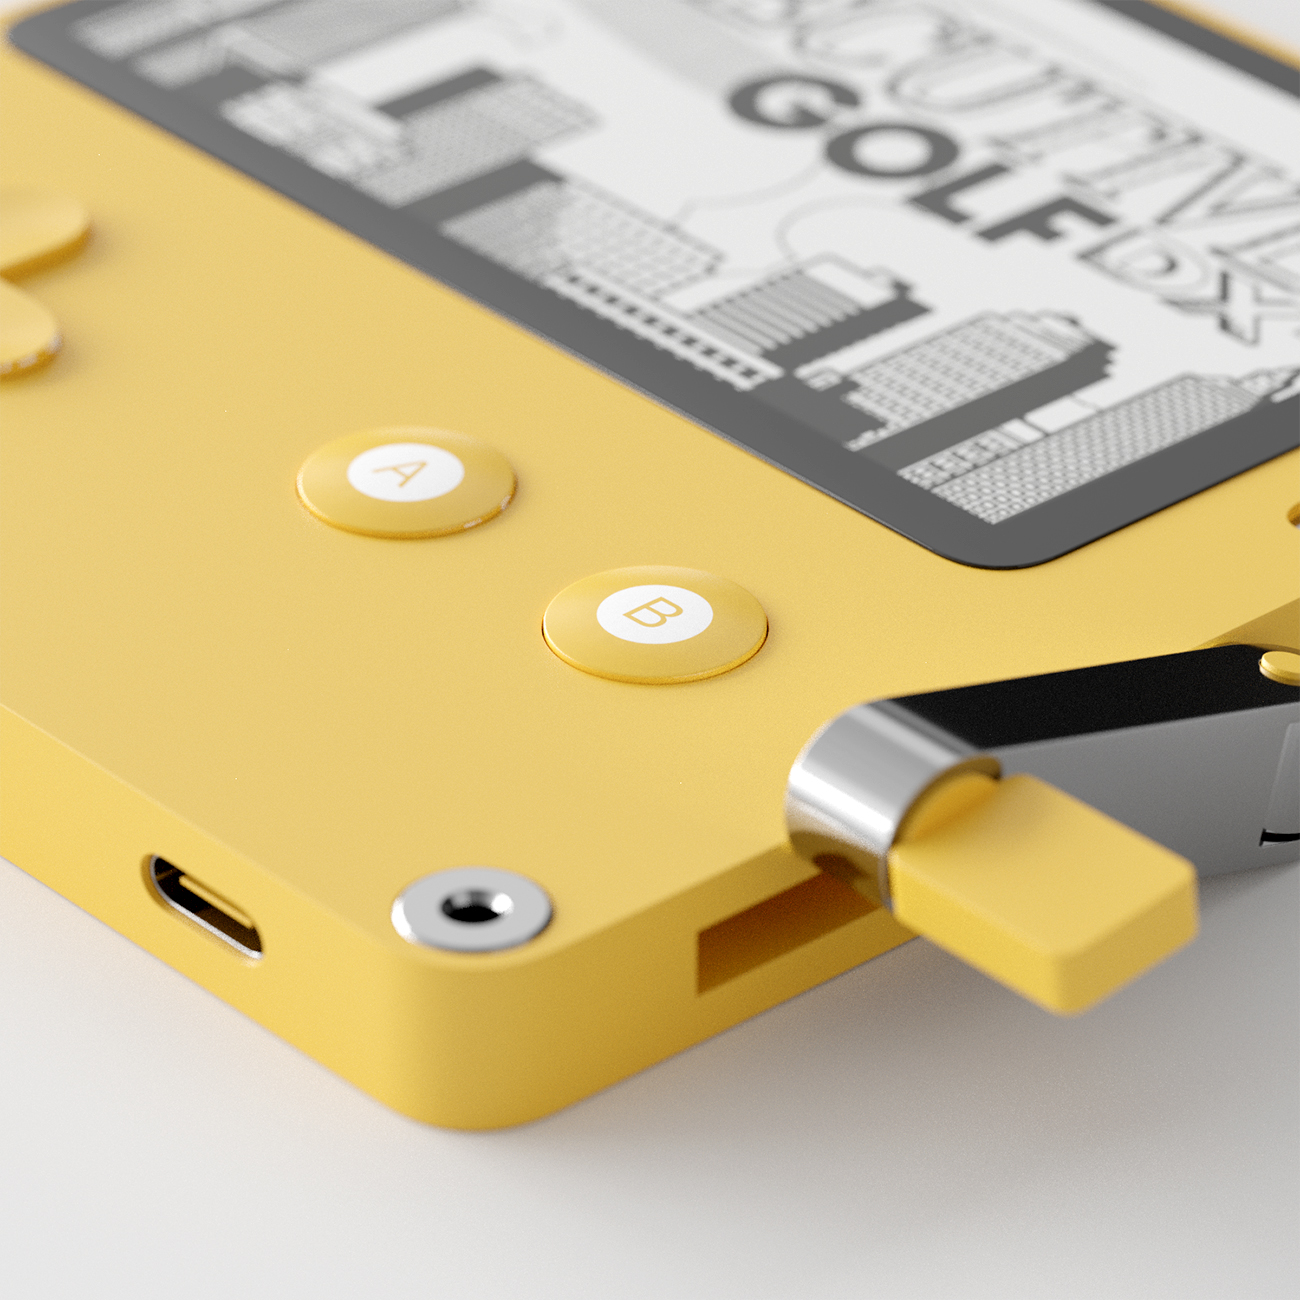 Playdate Handheld Console by Panic preview image 4